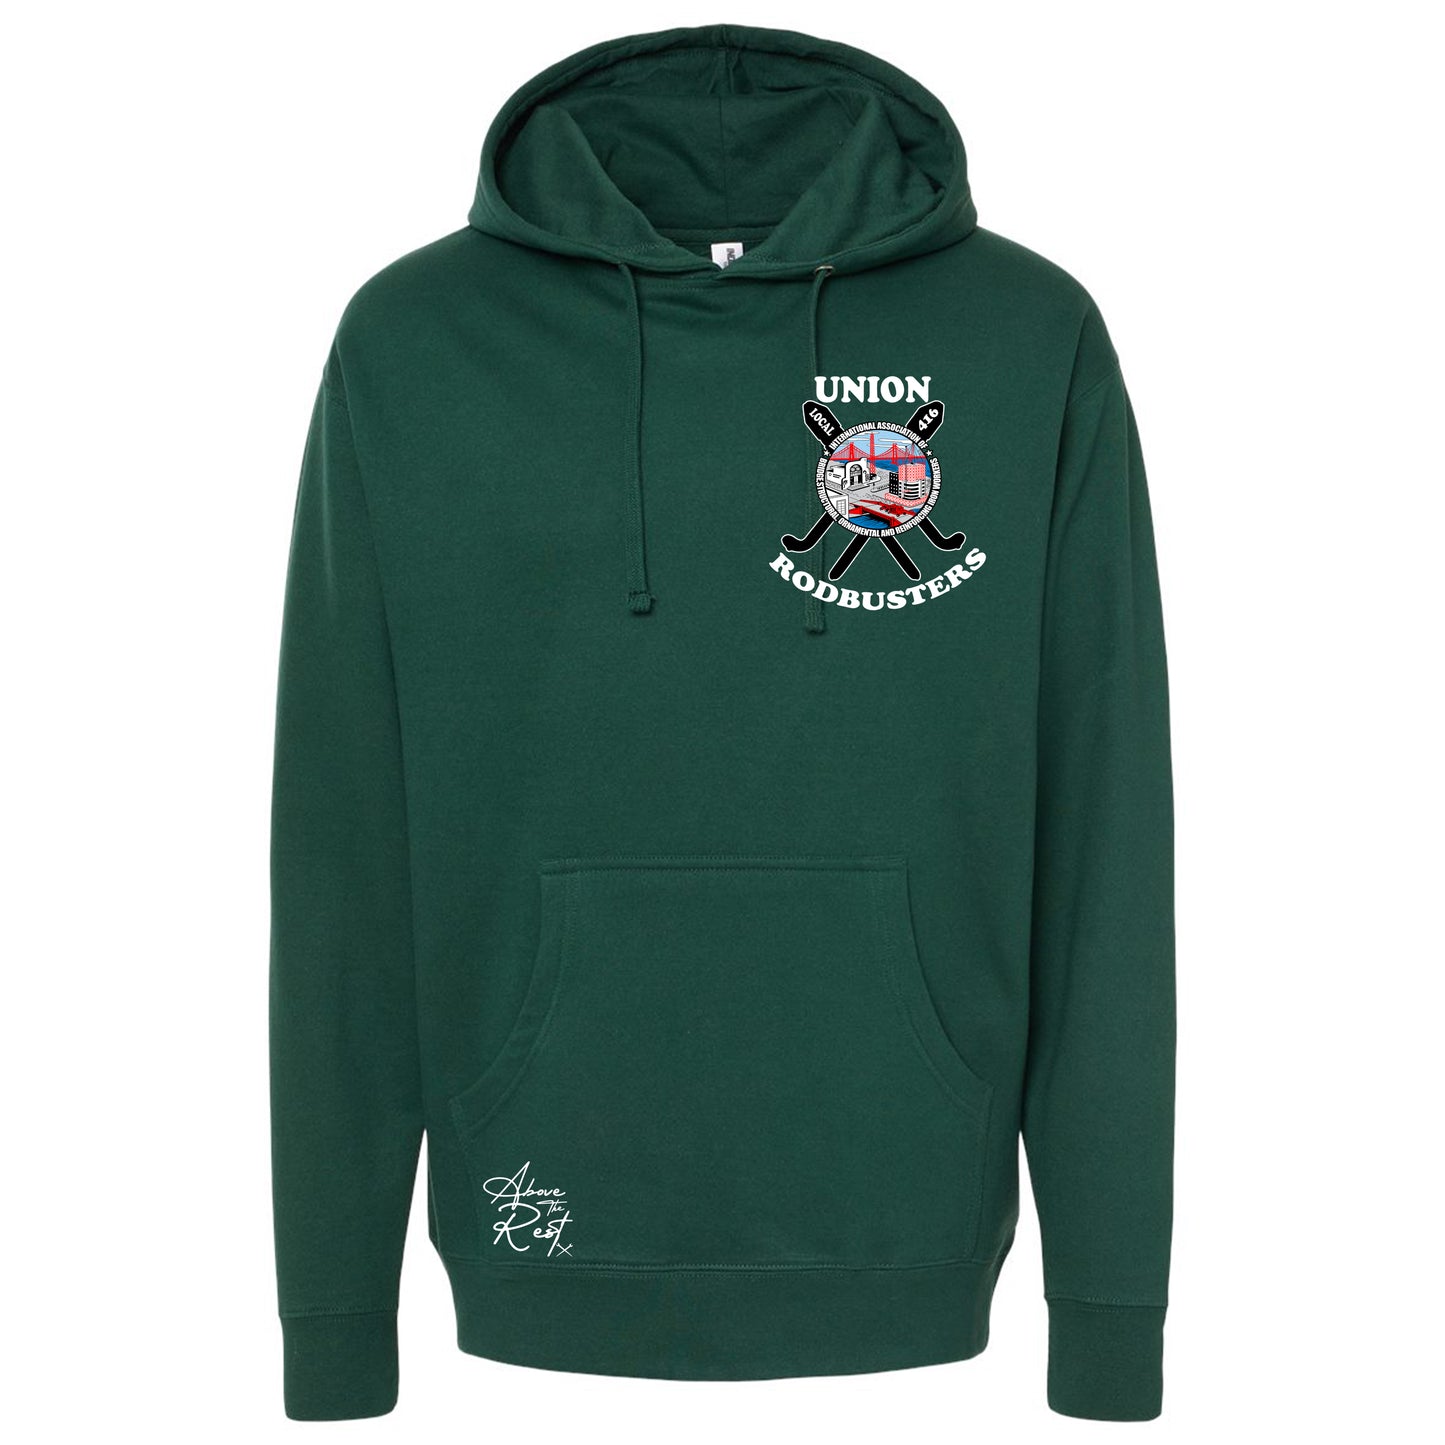 UNION INTER PULLOVER HOODIE LOCAL 416